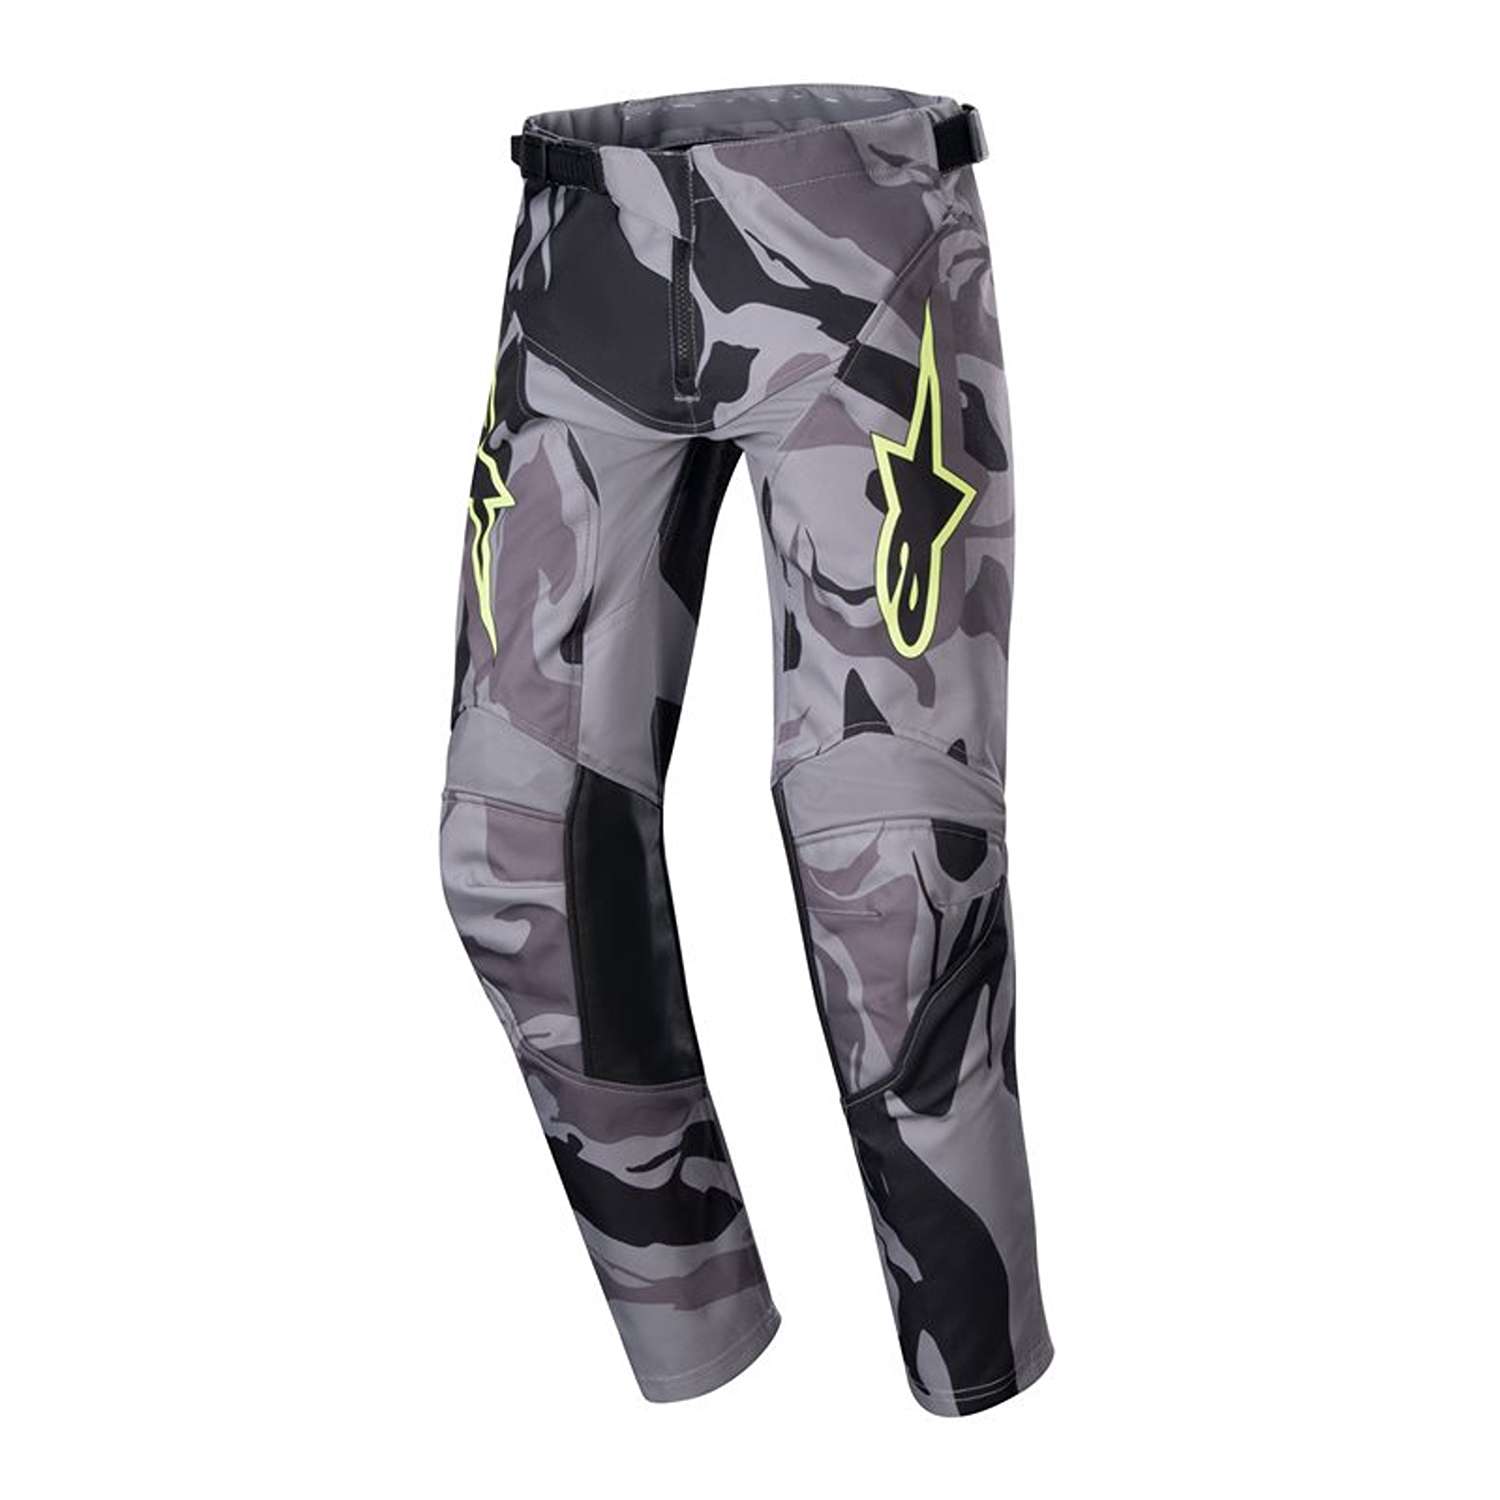 Image of EU Alpinestars Youth Racer Tactical Pants Cast Gray Camo Magnet Taille 28